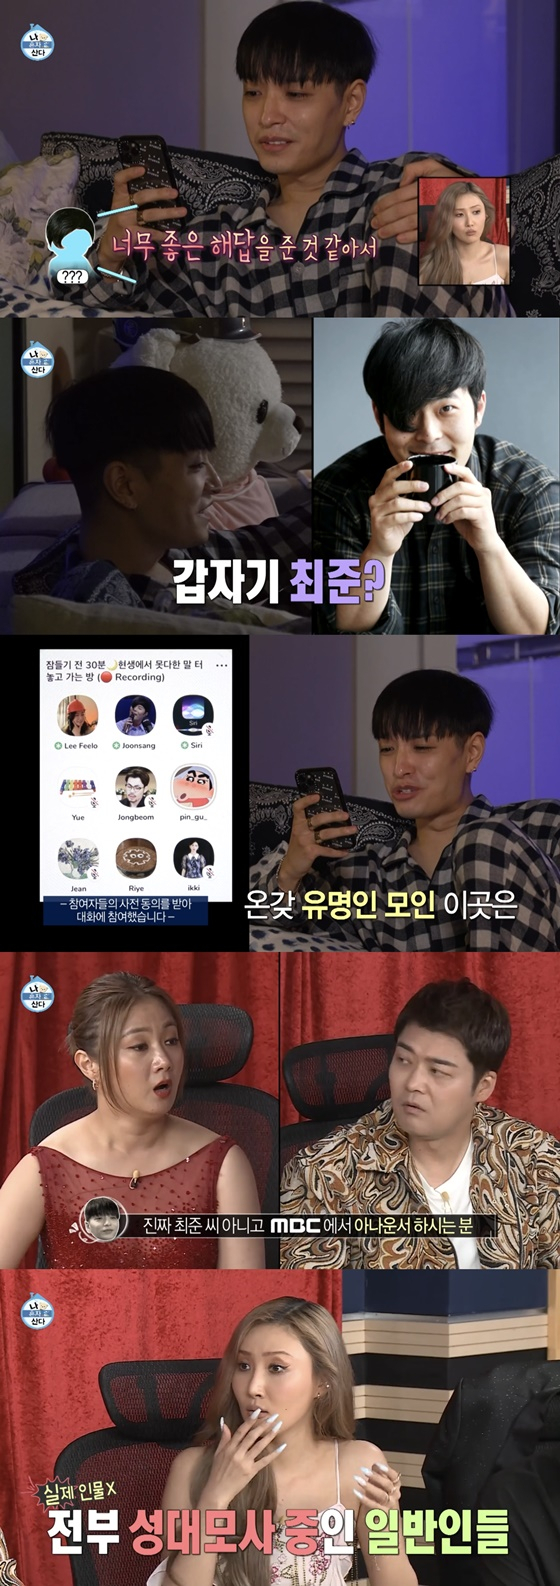 In the MBC entertainment program I Live Alone, which was broadcast on the afternoon of the 18th, Simon Dominics daily life was drawn.On the day of the broadcast, Simon Dominic shed tears of storms when he saw the drama My Man from Nowhere, which was featured by IU late at night.Simon Dominic said, I think I have been working on something and my life has been so bad these days. I watched a drama (My Man from Nowhere) that I take out whenever I want to be comforted.It is Feelings that can not be explained by any Feelings Simon Dominic watched My Man from Nowhere as he sweated and weptThen suddenly he picked up his cell phone and said, I just cried at the last meeting of My Man from Nowhere.I was lonely and I came here because I was tearful. This is Simon Dominics entry into the Sams Club House, a voice-based SNS, where it is available to participate only by being invited by existing subscribers on voice social media, and by voice only.Simon Dominic also explained about Sams ClubHouse as a hot SNS these days that communicates only with voice.Prior to the broadcast, I Live Alone said, Simon Dominic, who has been comforted by the drama, immediately connects the drama to the main character IU (?), and said, I have been a member of the IU, and netizens have pointed out that the person who imitated the IU has impersonated the IU at Sams ClubHouse.After the broadcast, I Live Alone viewers opinions bulletin boards are pouring related articles, as well as SNS and online communities have been moved to create a hot response.The production team of I Live Alone edited the part in the re-broadcasting and wave OTT service as if it were conscious of the controversy.Choi Juns vocal simulation was said to be Kim Jun-sang announcer, but why did not he mention the hemisphere about the IUs vocalization?Just because I Live Alone has edited the controversial part of the I Live Alone side, it is right to apologize before editing.Of course, I should have said that IU was a vocal simulation so that this controversy did not happen in this broadcast.